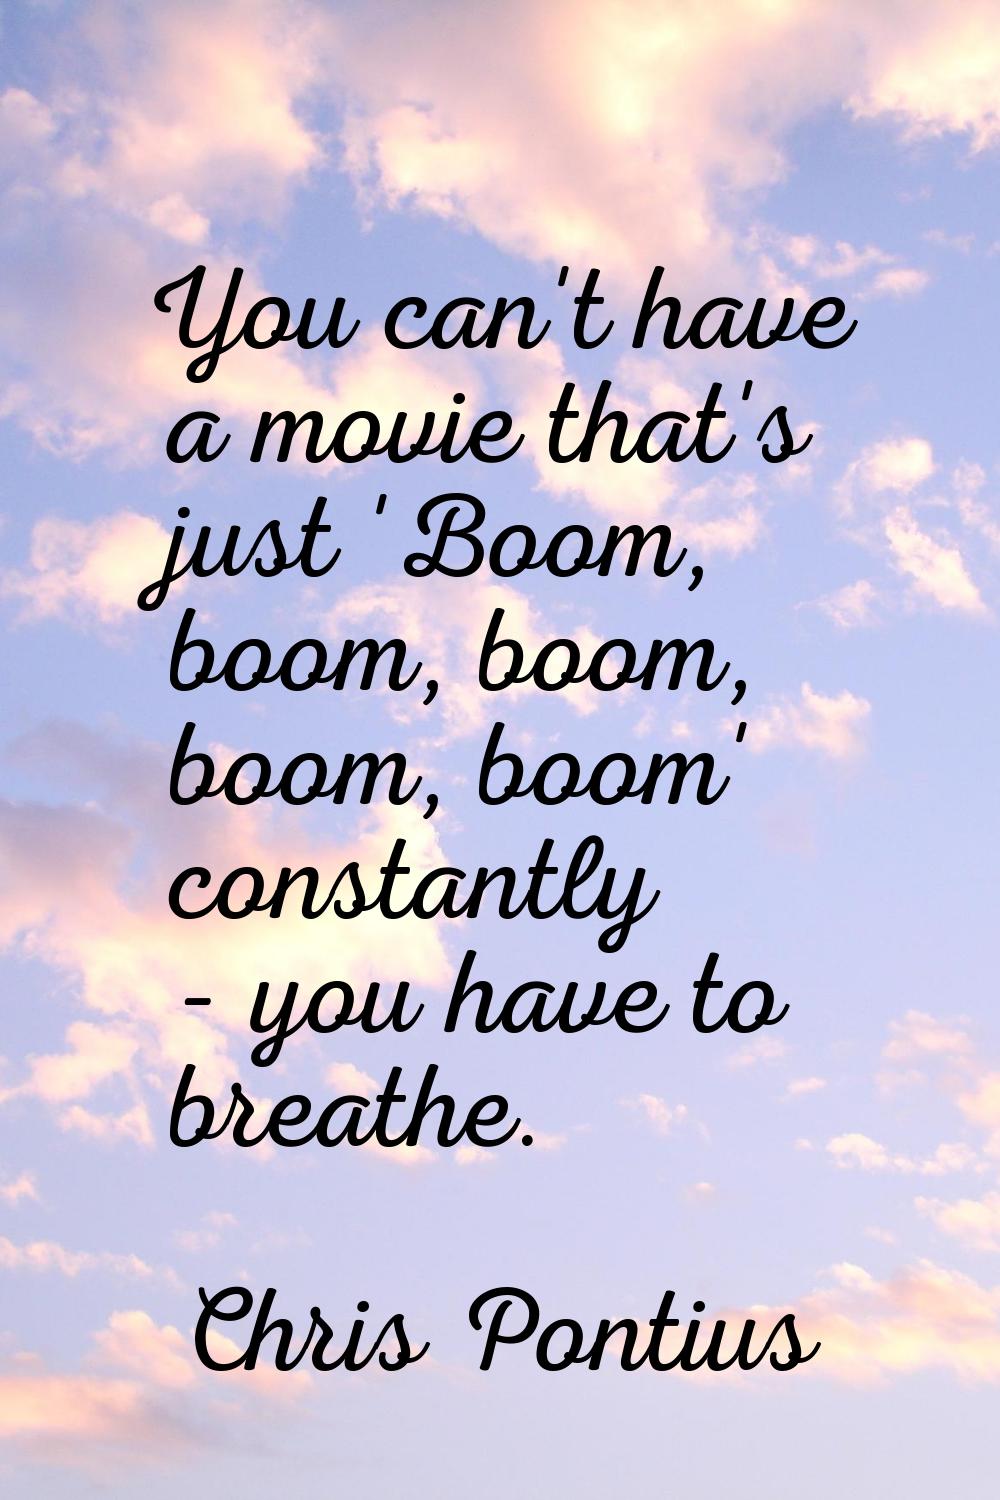 You can't have a movie that's just 'Boom, boom, boom, boom, boom' constantly - you have to breathe.